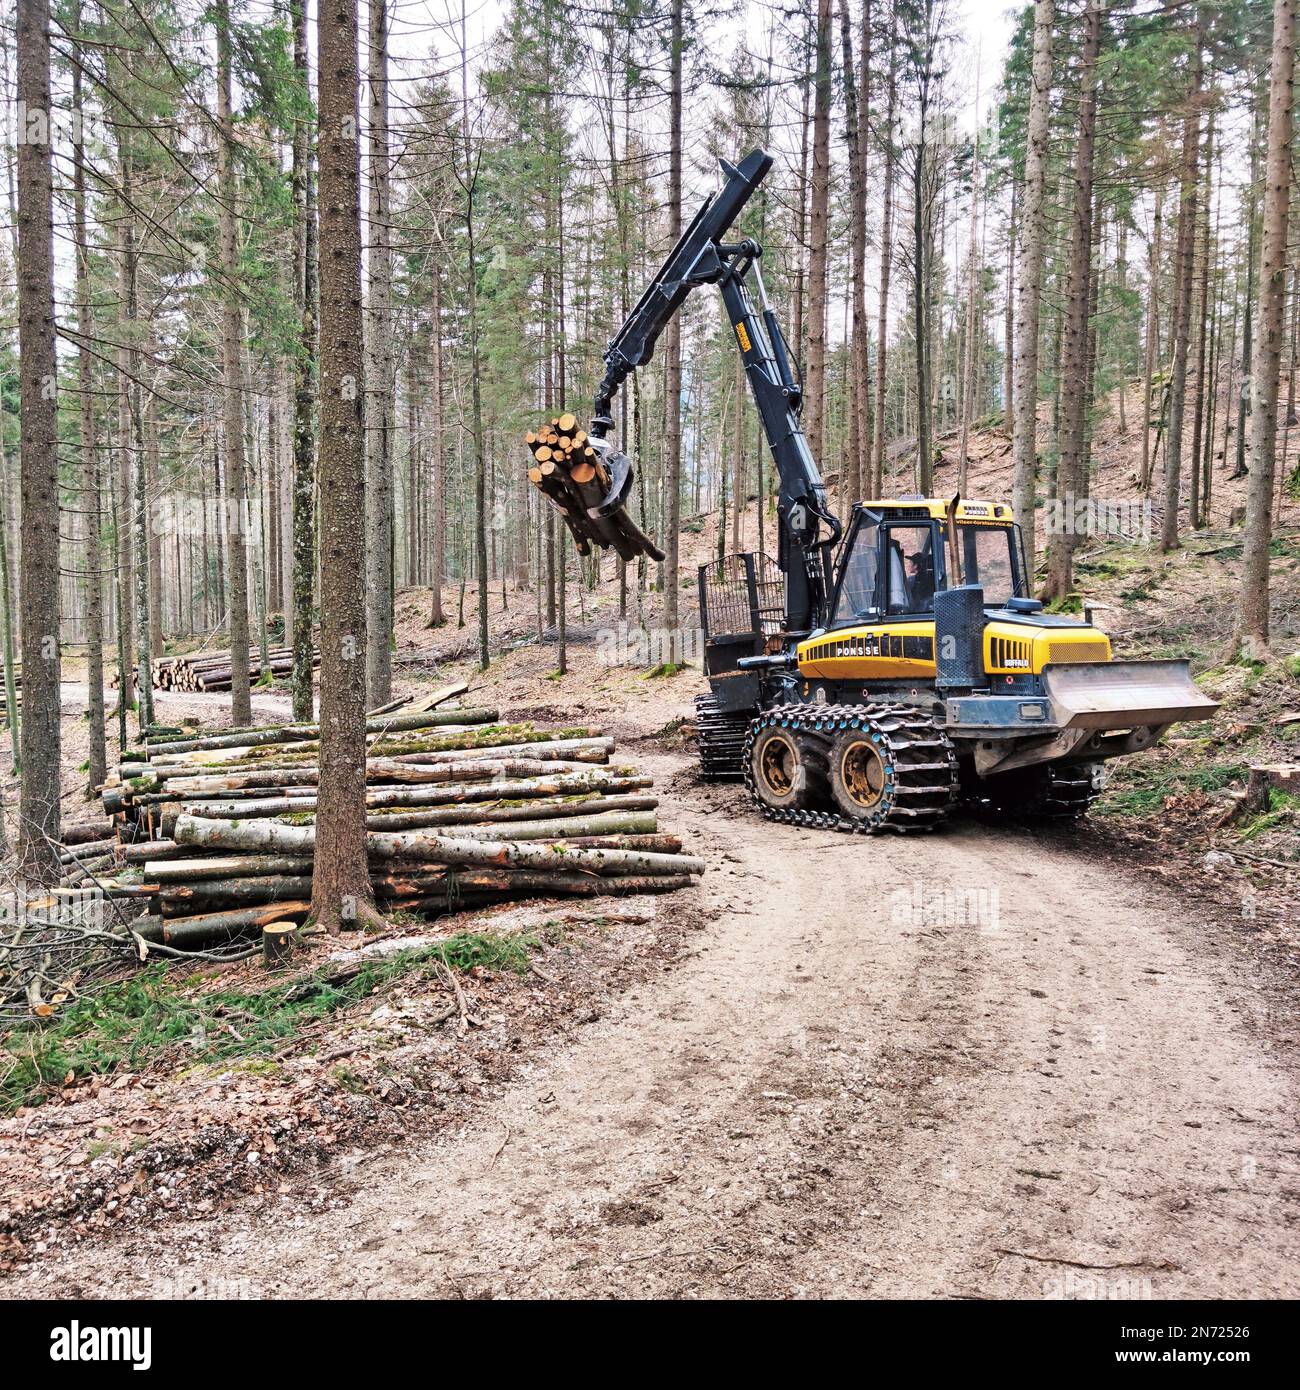 Forest work with a harvester machine for timber harvesting Stock Photo